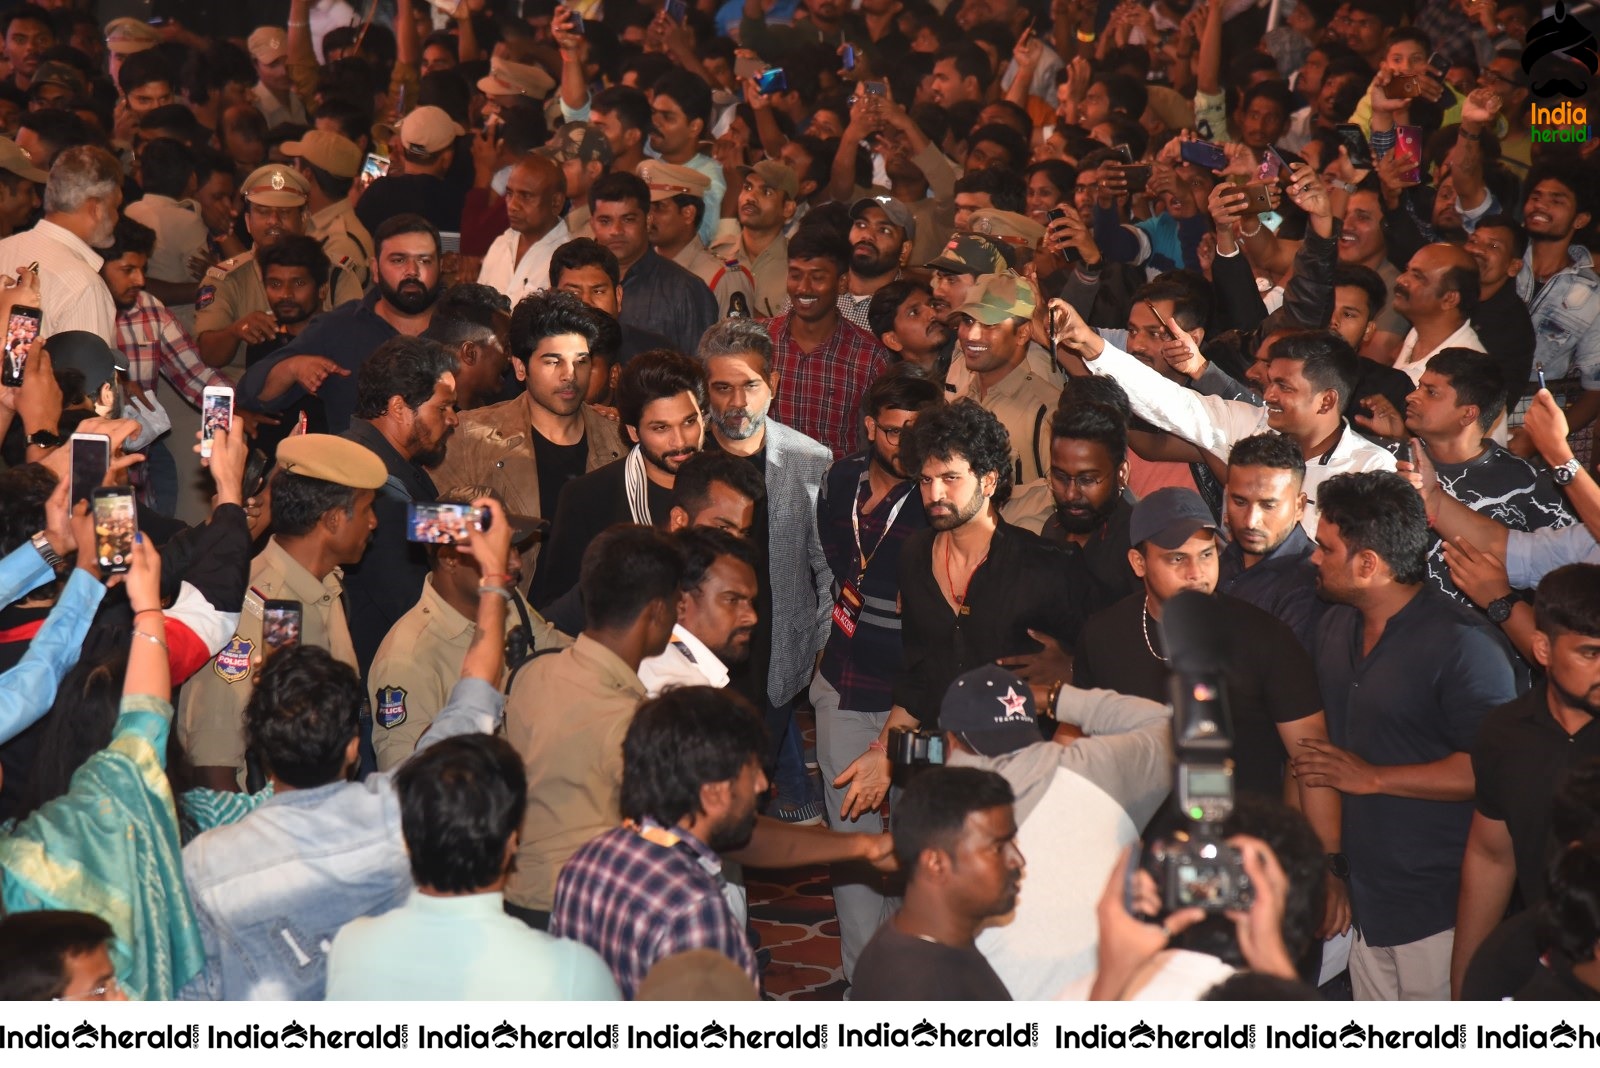 Actor Allu Arjun mobbed by Crowd during his Mass Entry Set 1